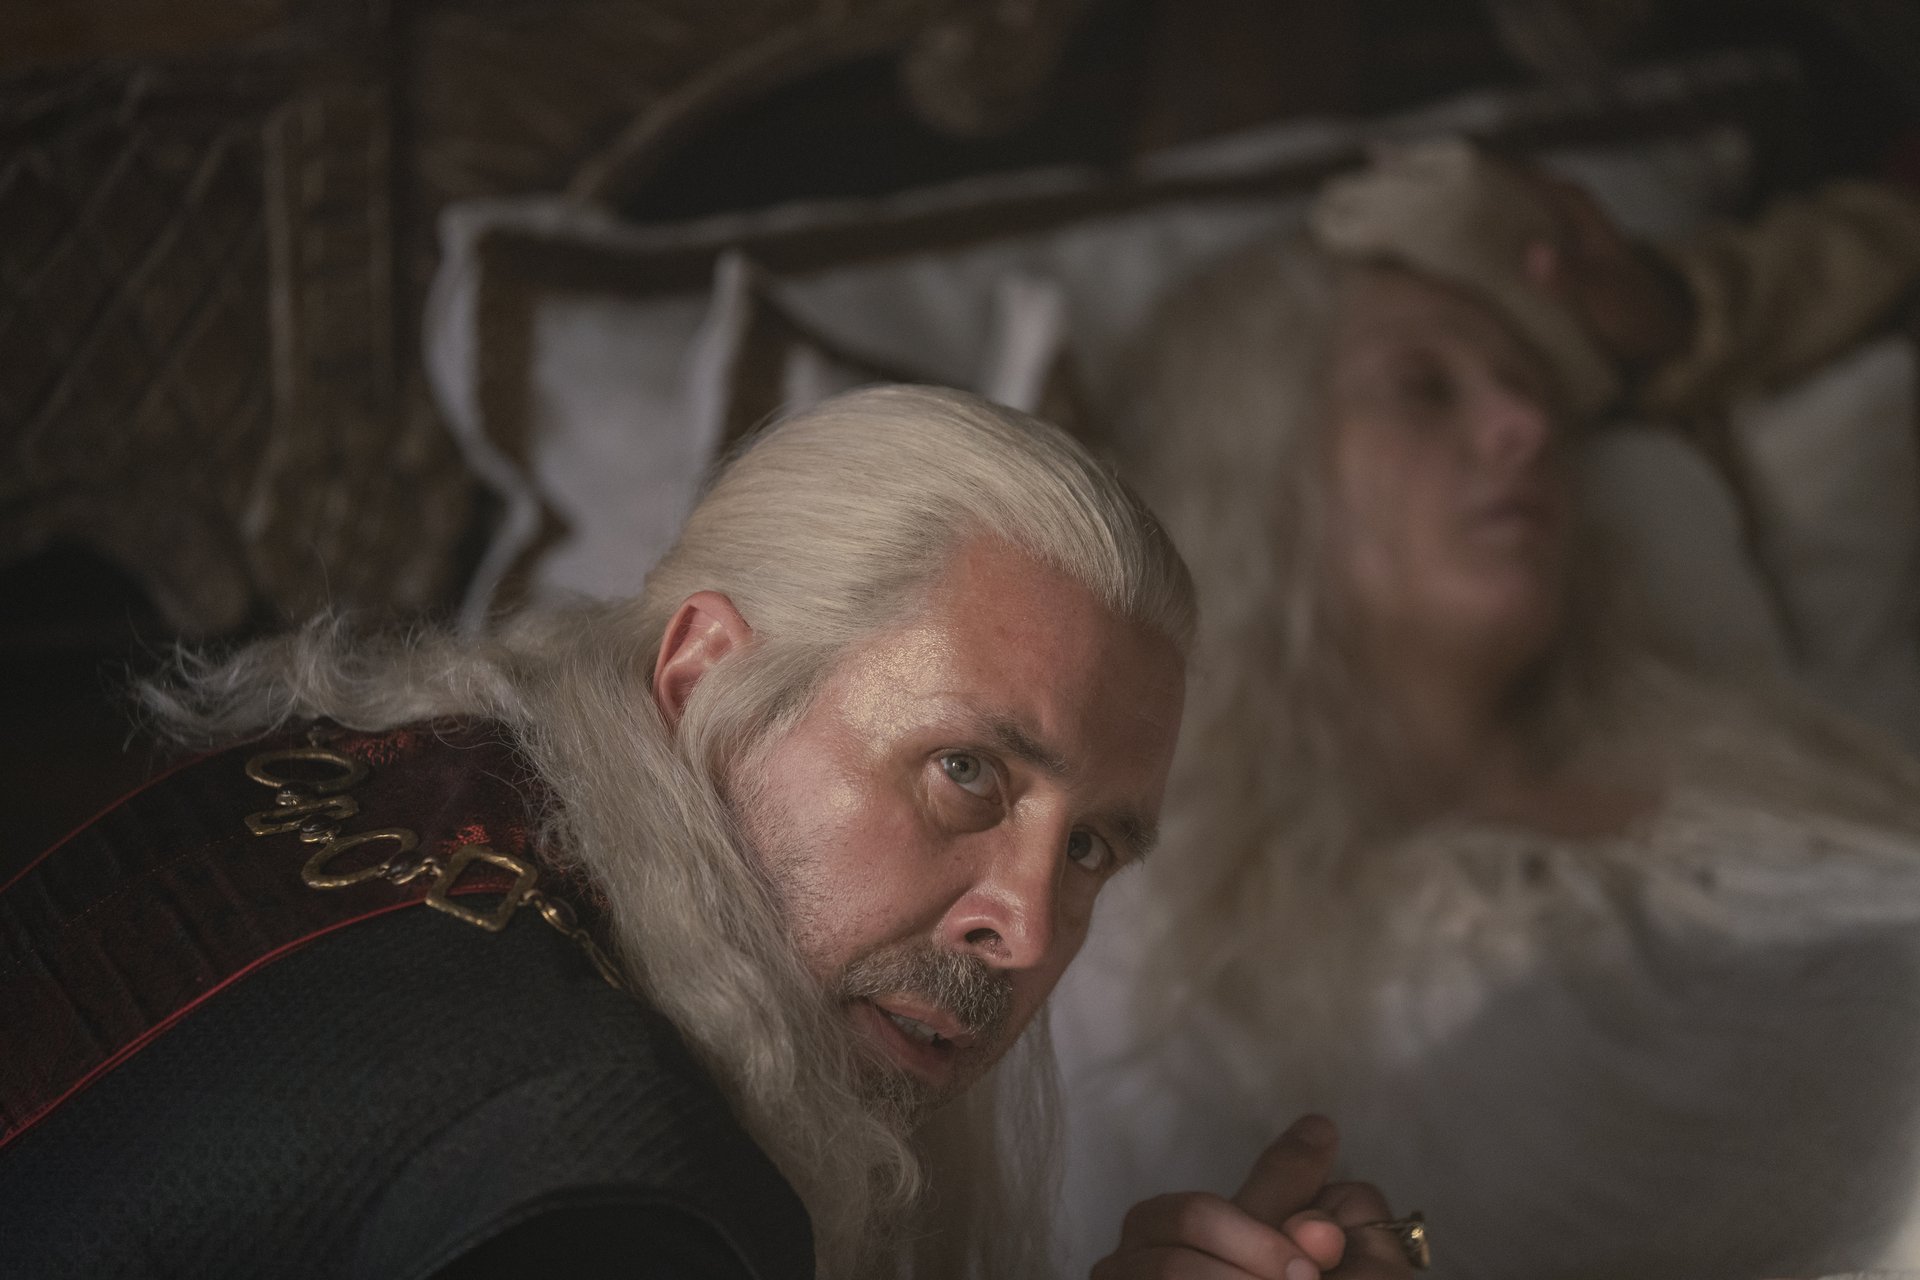 Viserys (Paddy Considine) at Queen Aemma (Sian Brooke) in the 'House of the Dragon' premiere episode